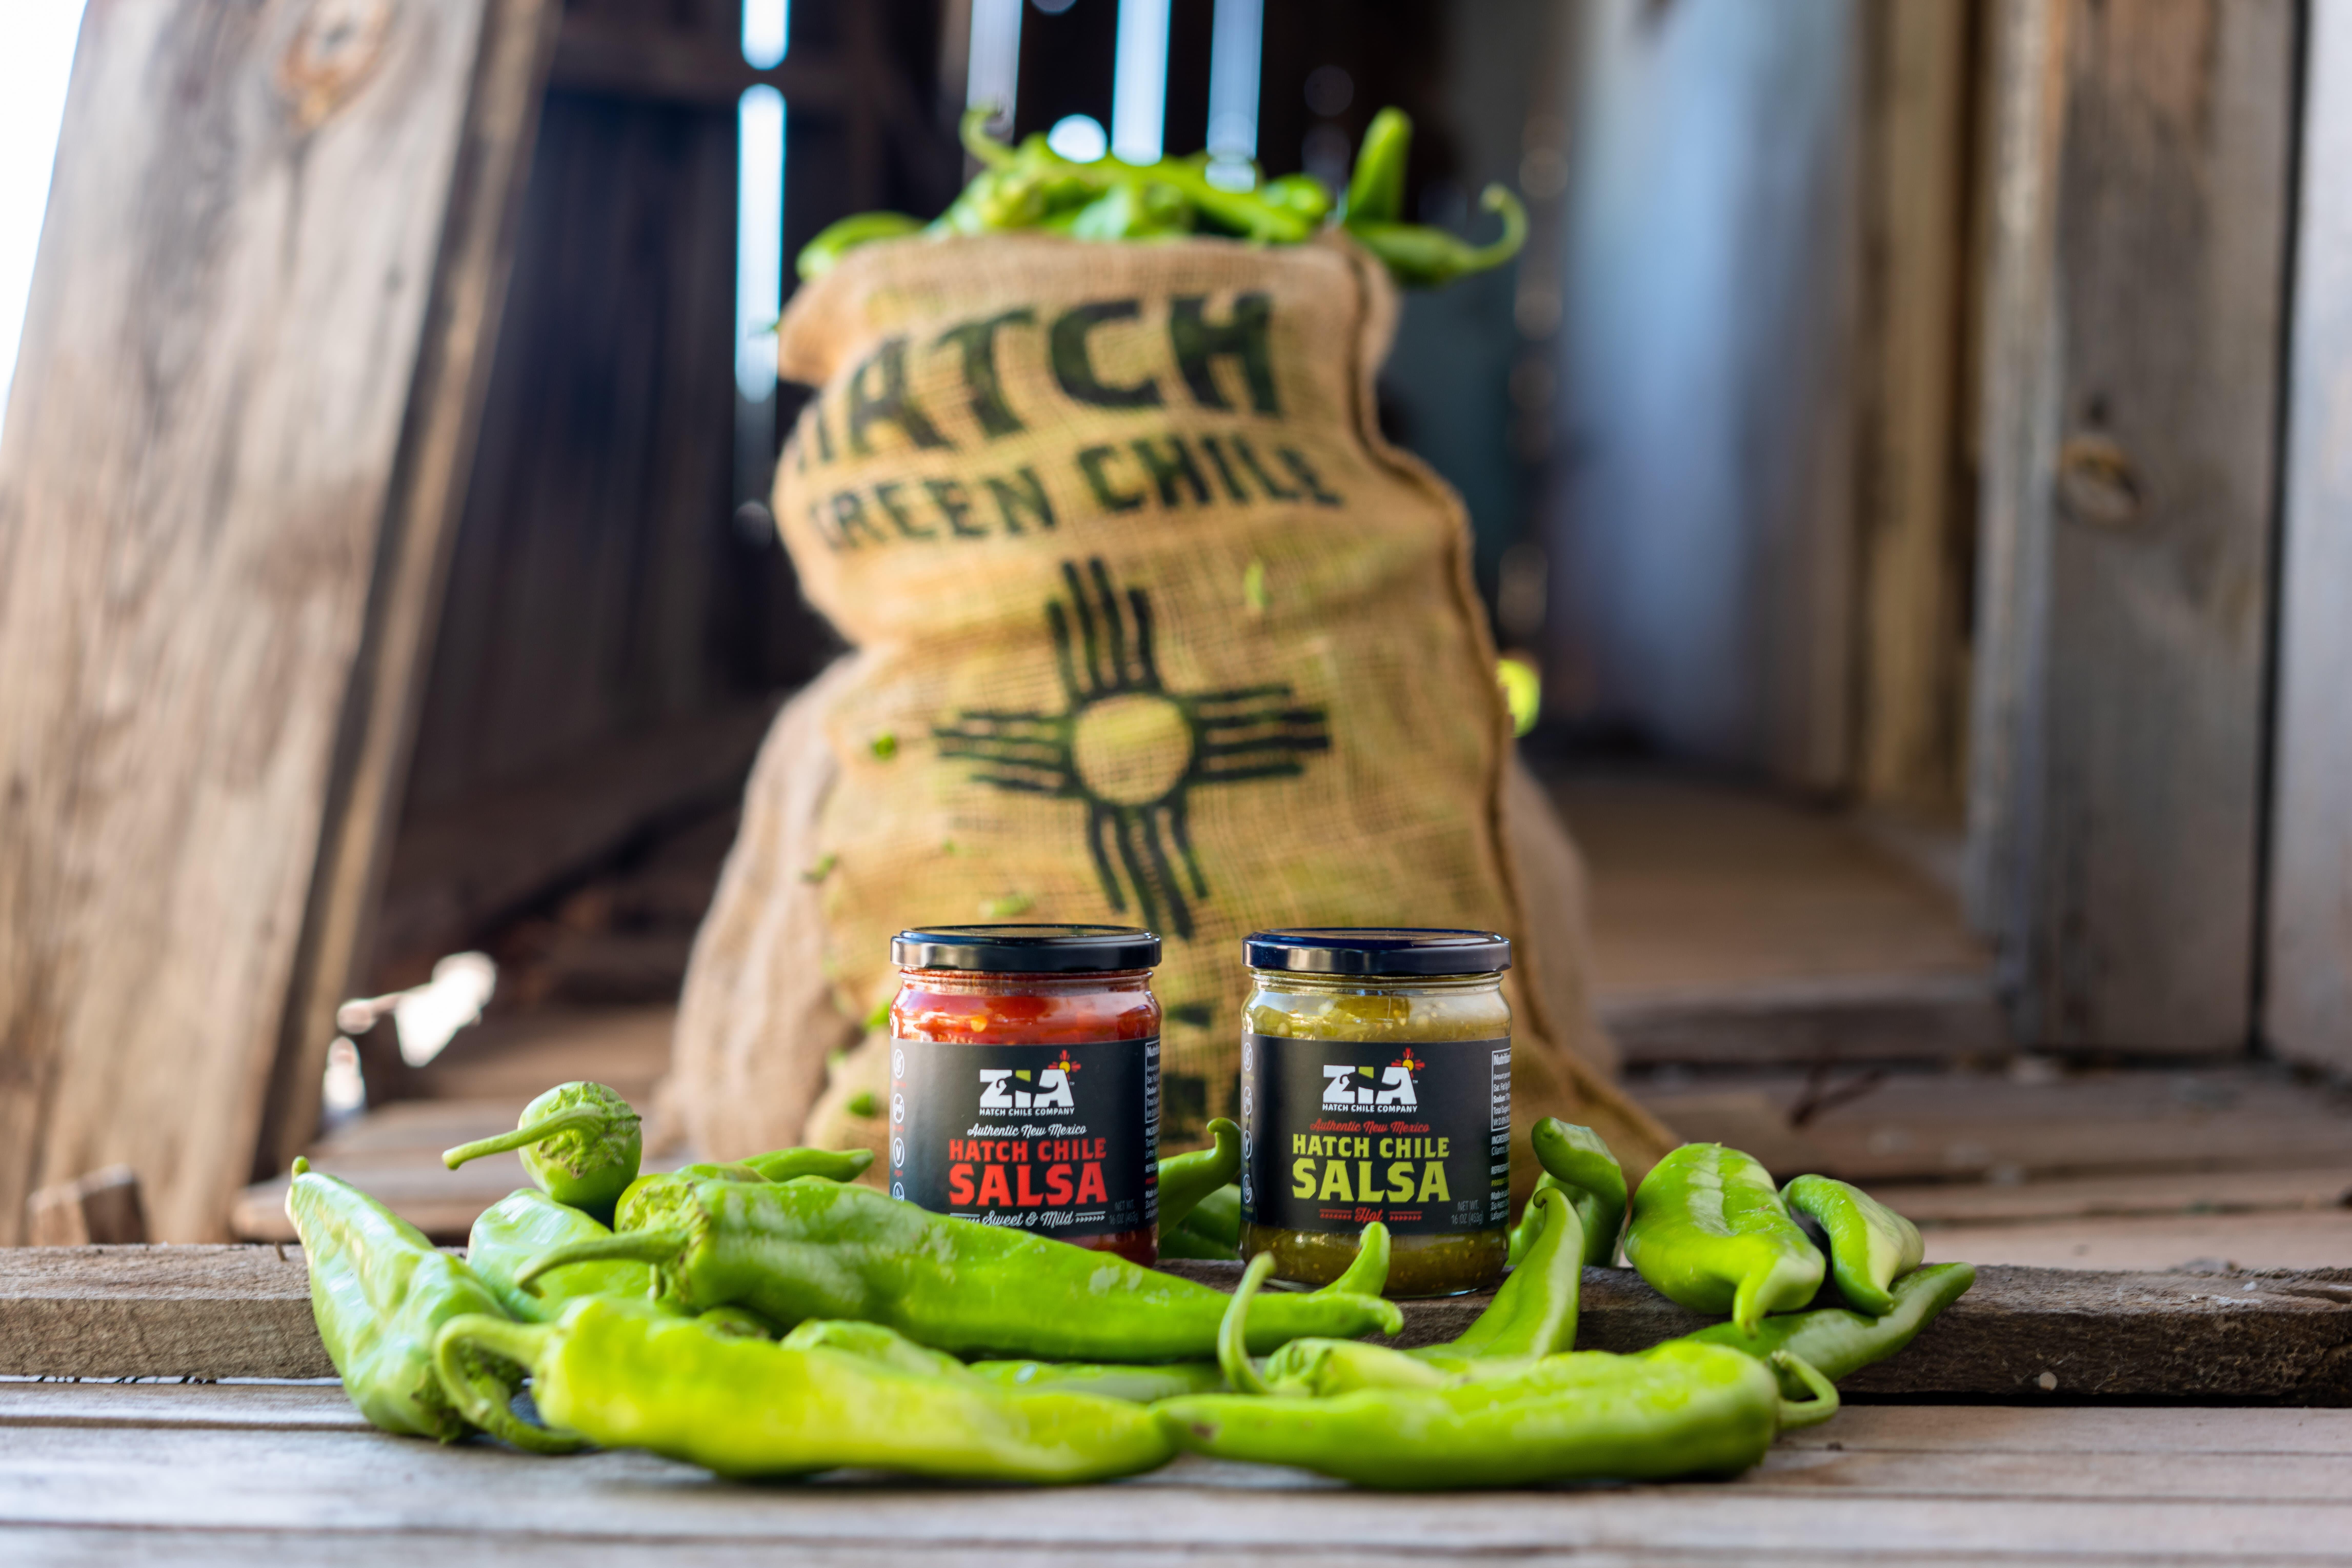 Zia Hatch Chile Company offers freshly-roasted Hatch green chile and Hatch chile salsa. The products are available at Whole Foods Market, and a number of other retailers nationwide.